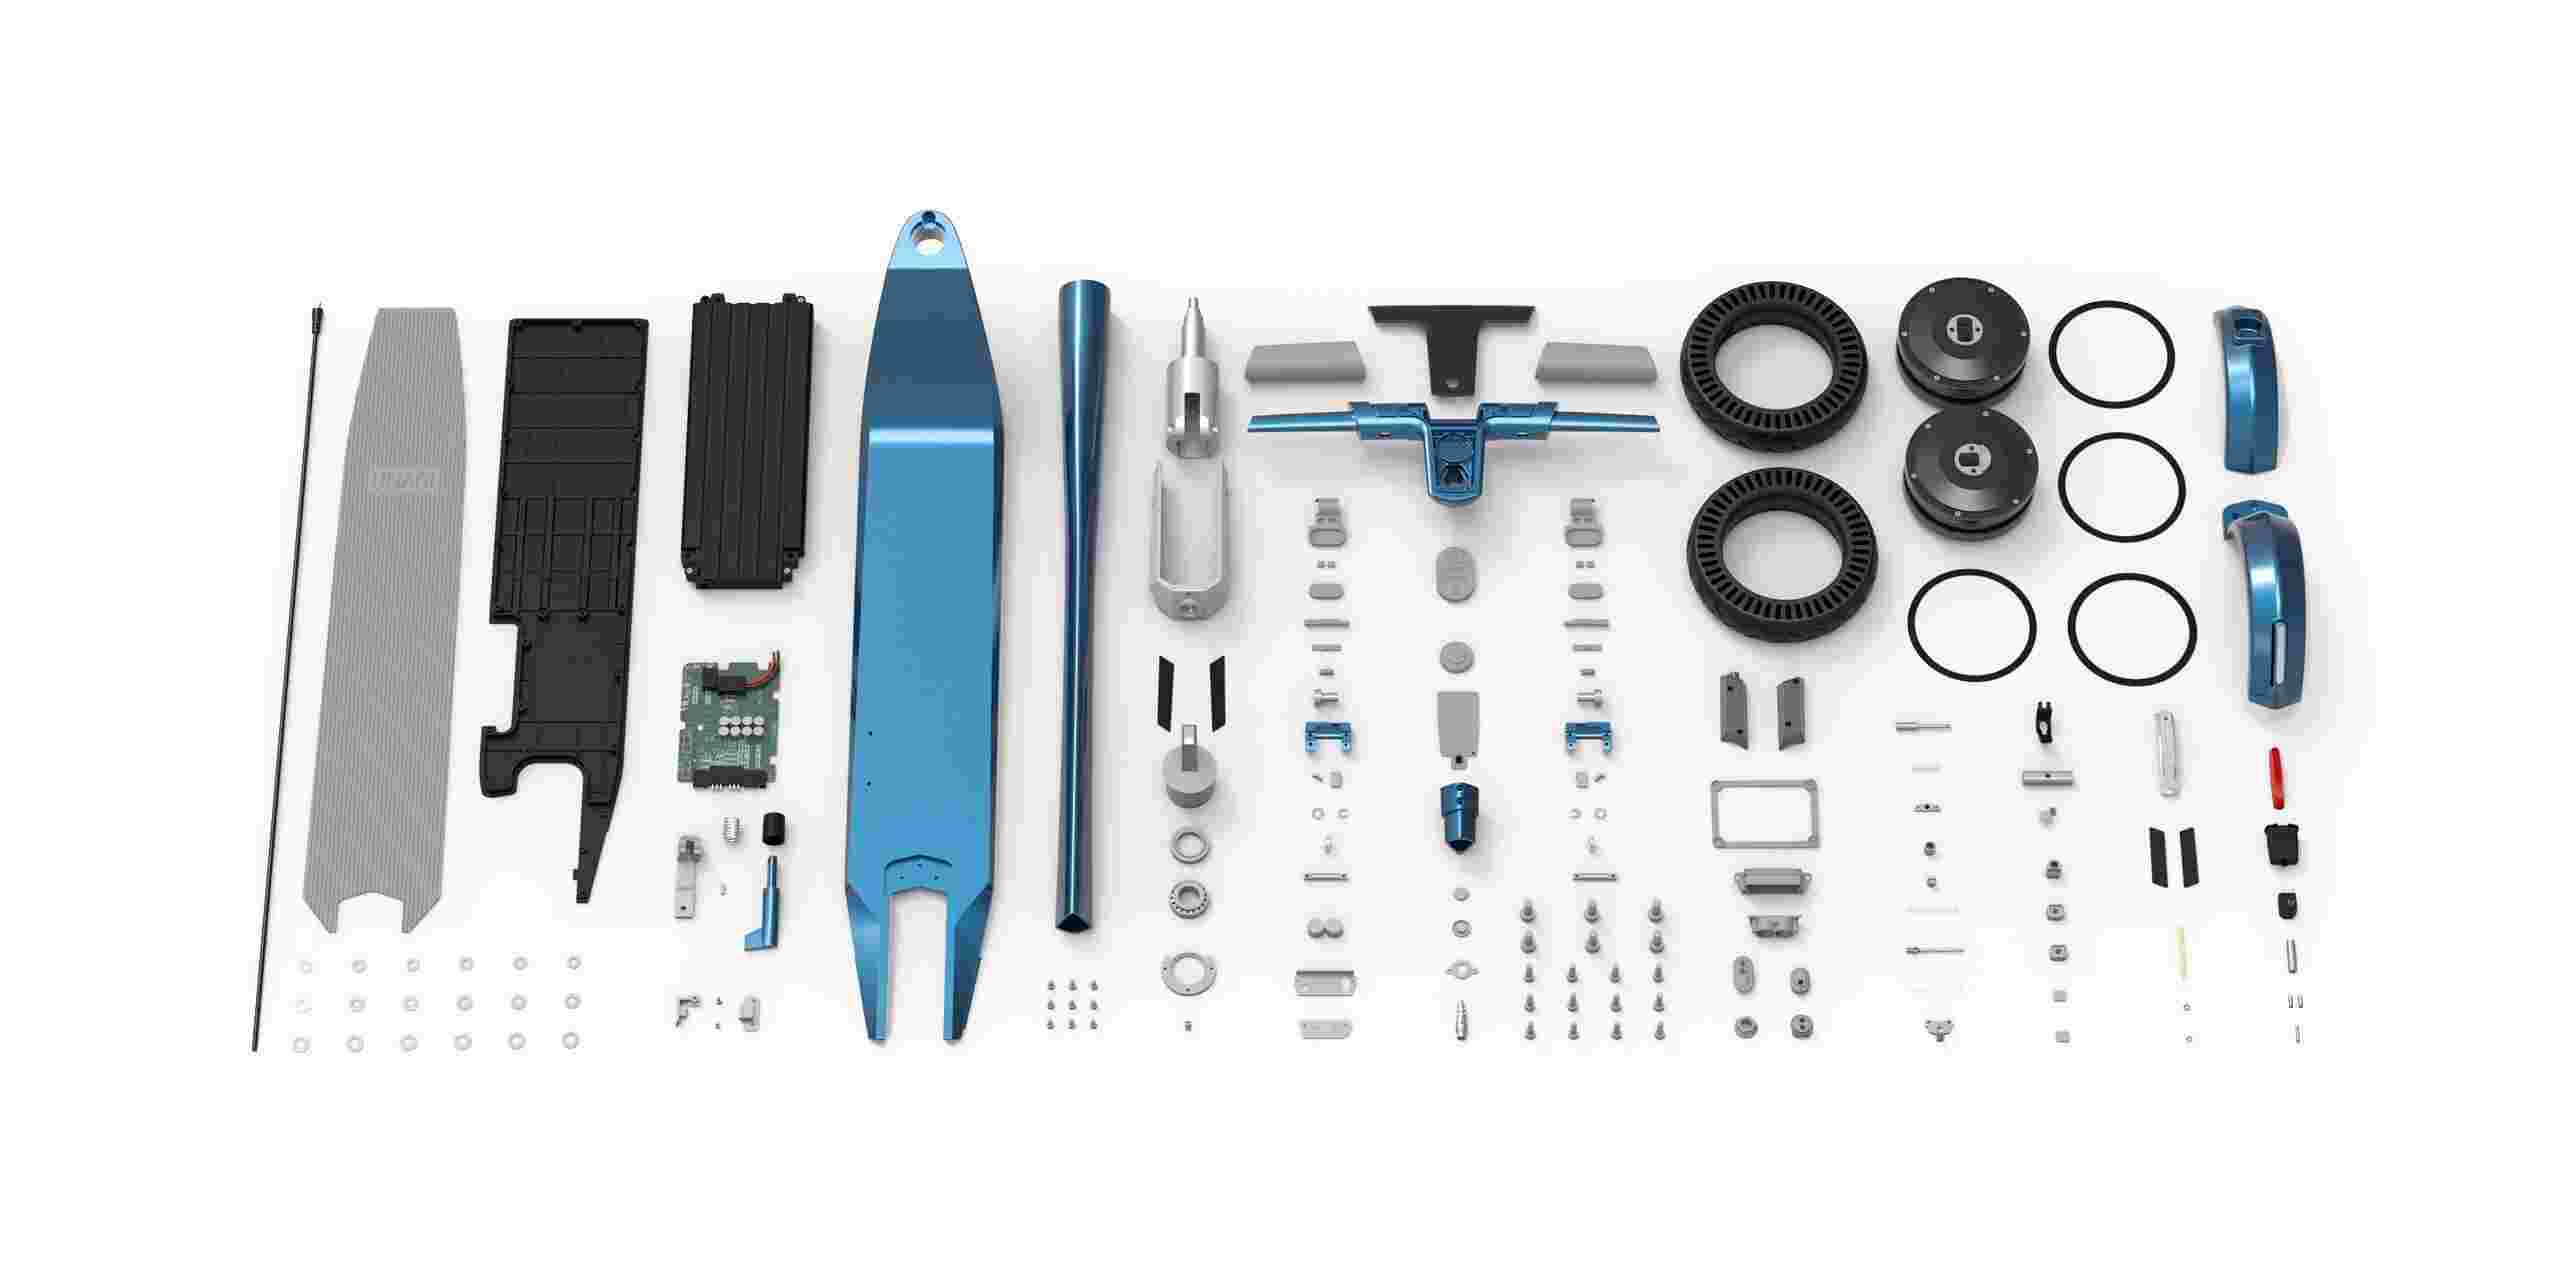 E-Scooter Components